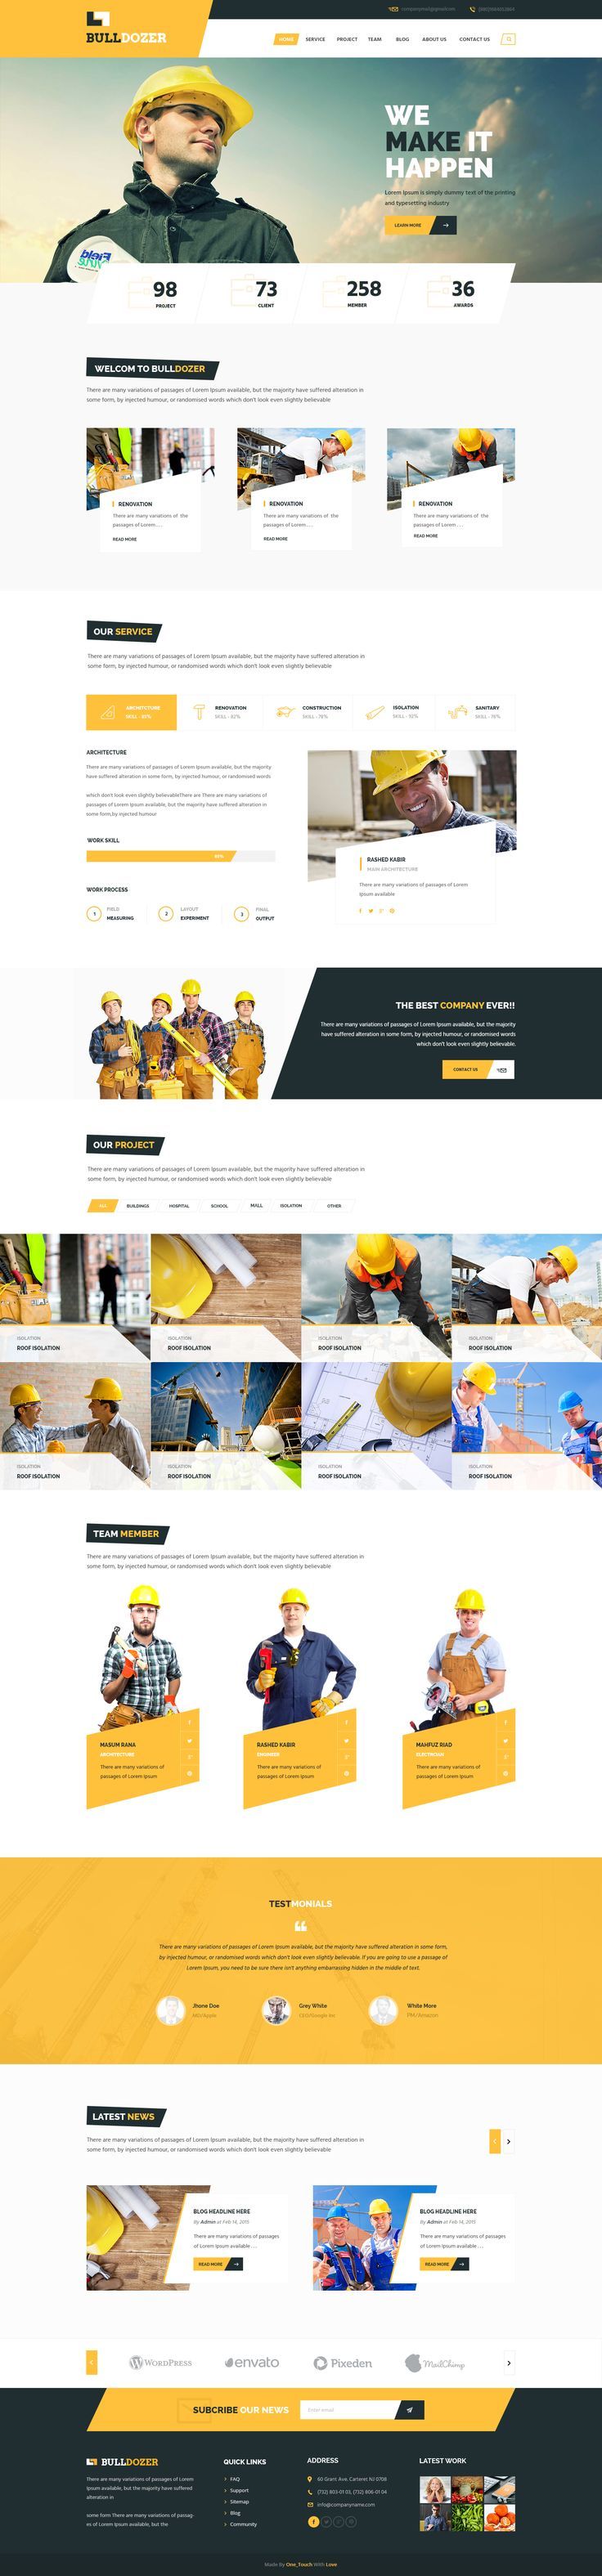 Clean and simple web design for a construction website designed by Masum Rana, v...